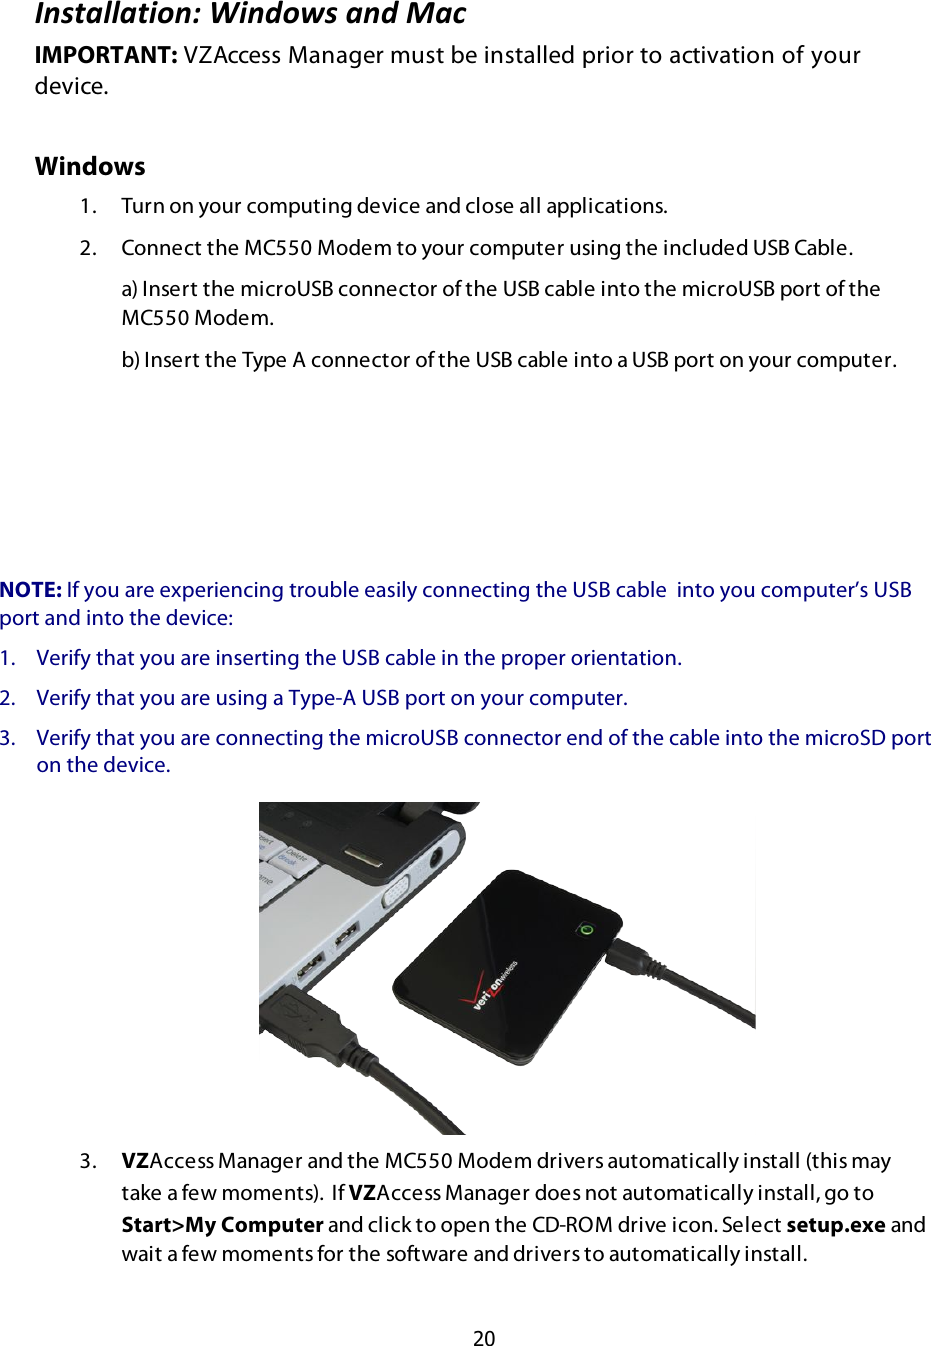  20  N:73-;;-39):O$@9:*)J7$-:*$%-.$IMPORTANT: VZAccess Manager must be installed prior to activation of your device. Windows 1.  Turn on your computing device and close all applications. 2.  Connect the MC550 Modem to your computer using the included USB Cable.   a) Insert the microUSB connector of the USB cable into the microUSB port of the MC550 Modem.   b) Insert the Type A connector of the USB cable into a USB port on your computer.   3.  VZAccess Manager and the MC550 Modem drivers automatically install (this may take a few moments).  If VZAccess Manager does not automatically install, go to Start&gt;My Computer and click to open the CD-ROM drive icon. Select setup.exe and wait a few moments for the software and drivers to automatically install.  NOTE: If you are experiencing trouble easily connecting the USB cable  into you computer’s USB port and into the device: 1. Verify that you are inserting the USB cable in the proper orientation. 2. Verify that you are using a Type-A USB port on your computer. 3. Verify that you are connecting the microUSB connector end of the cable into the microSD port on the device. 